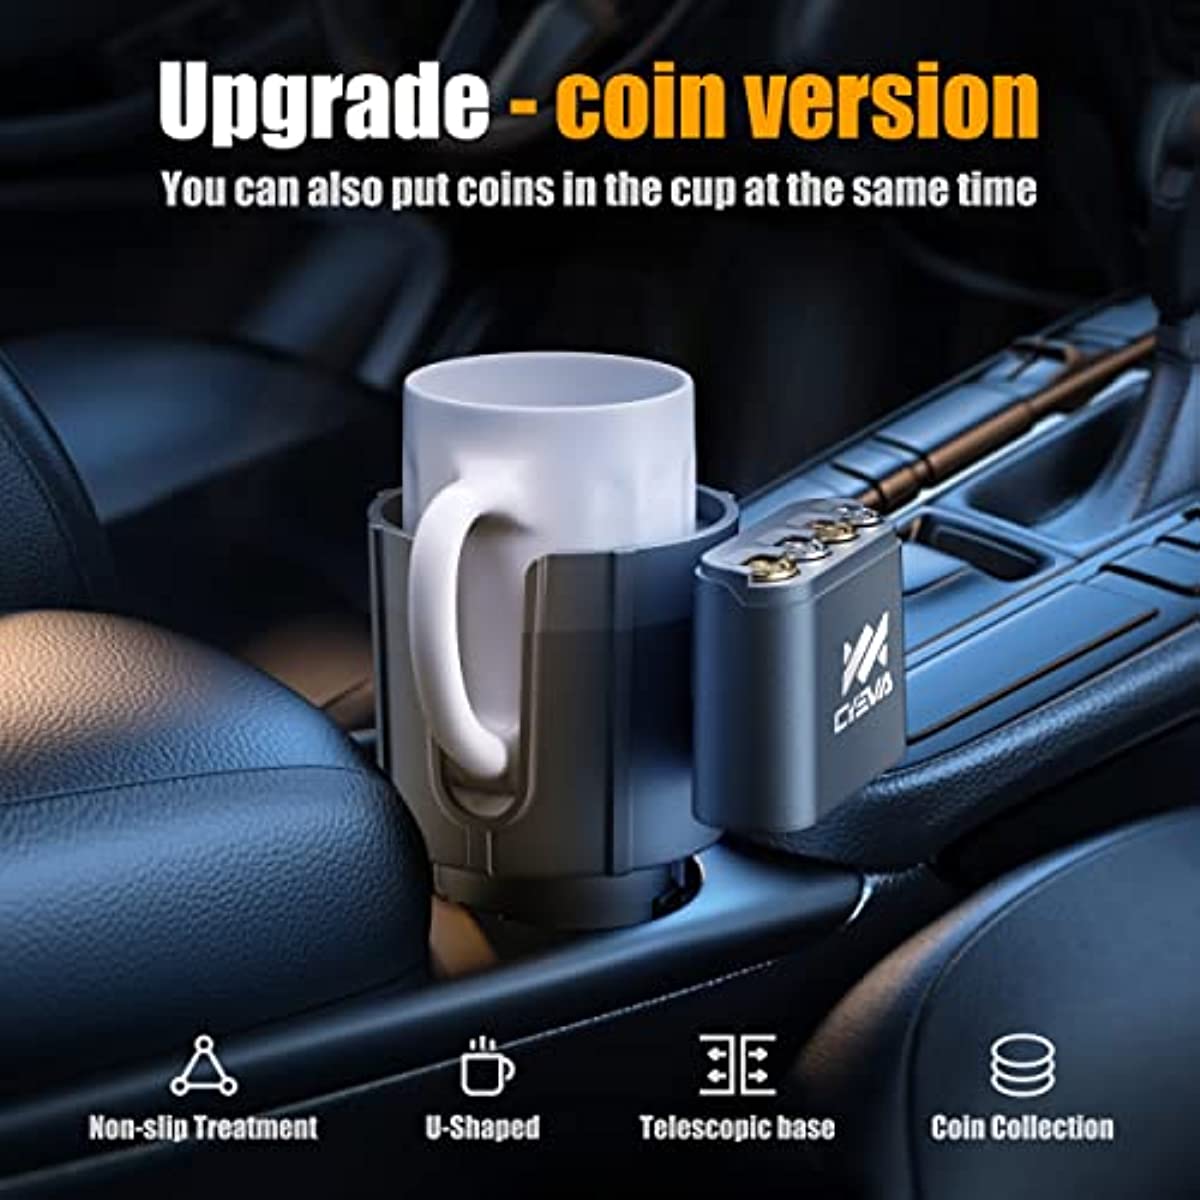 Upgraded Car Cup Holder Expander Adapter with Offset Adjustable